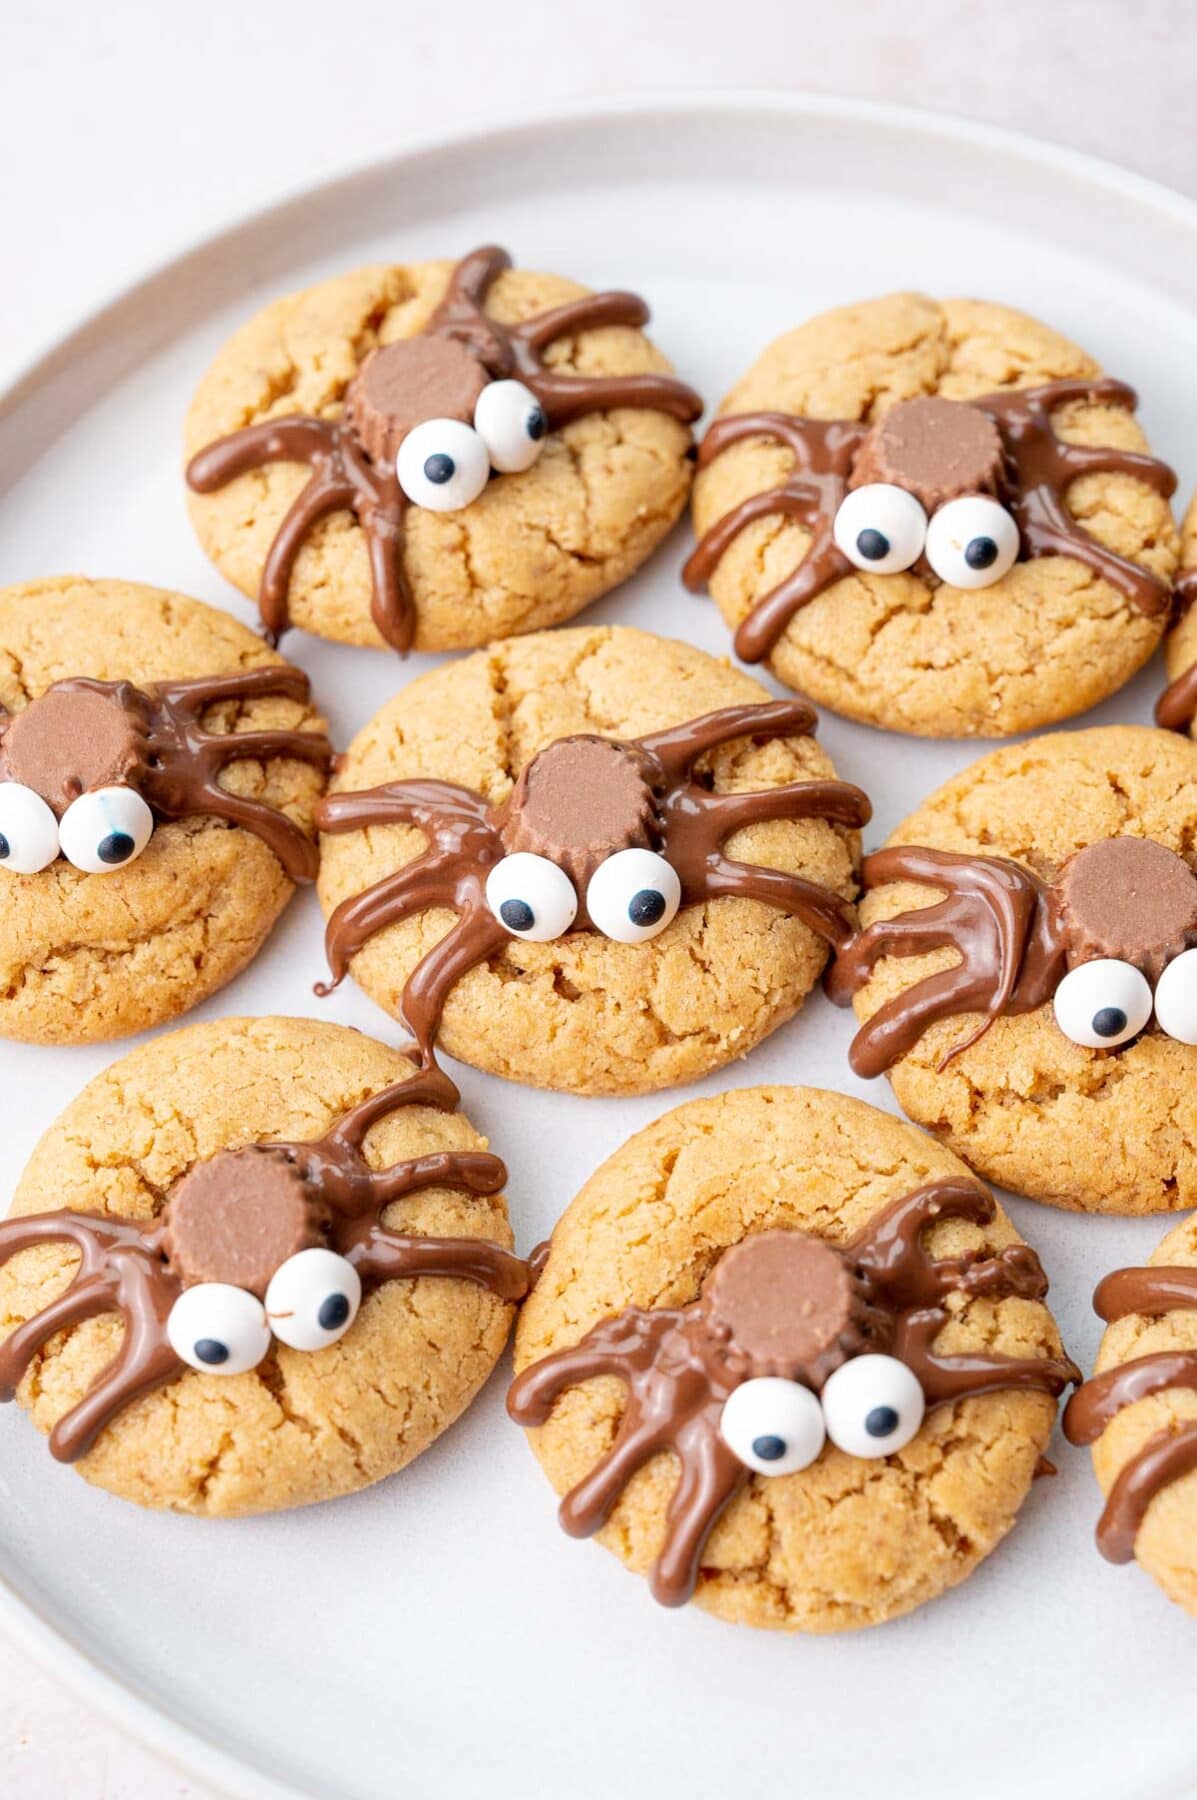 Spider cookies on a white plate.